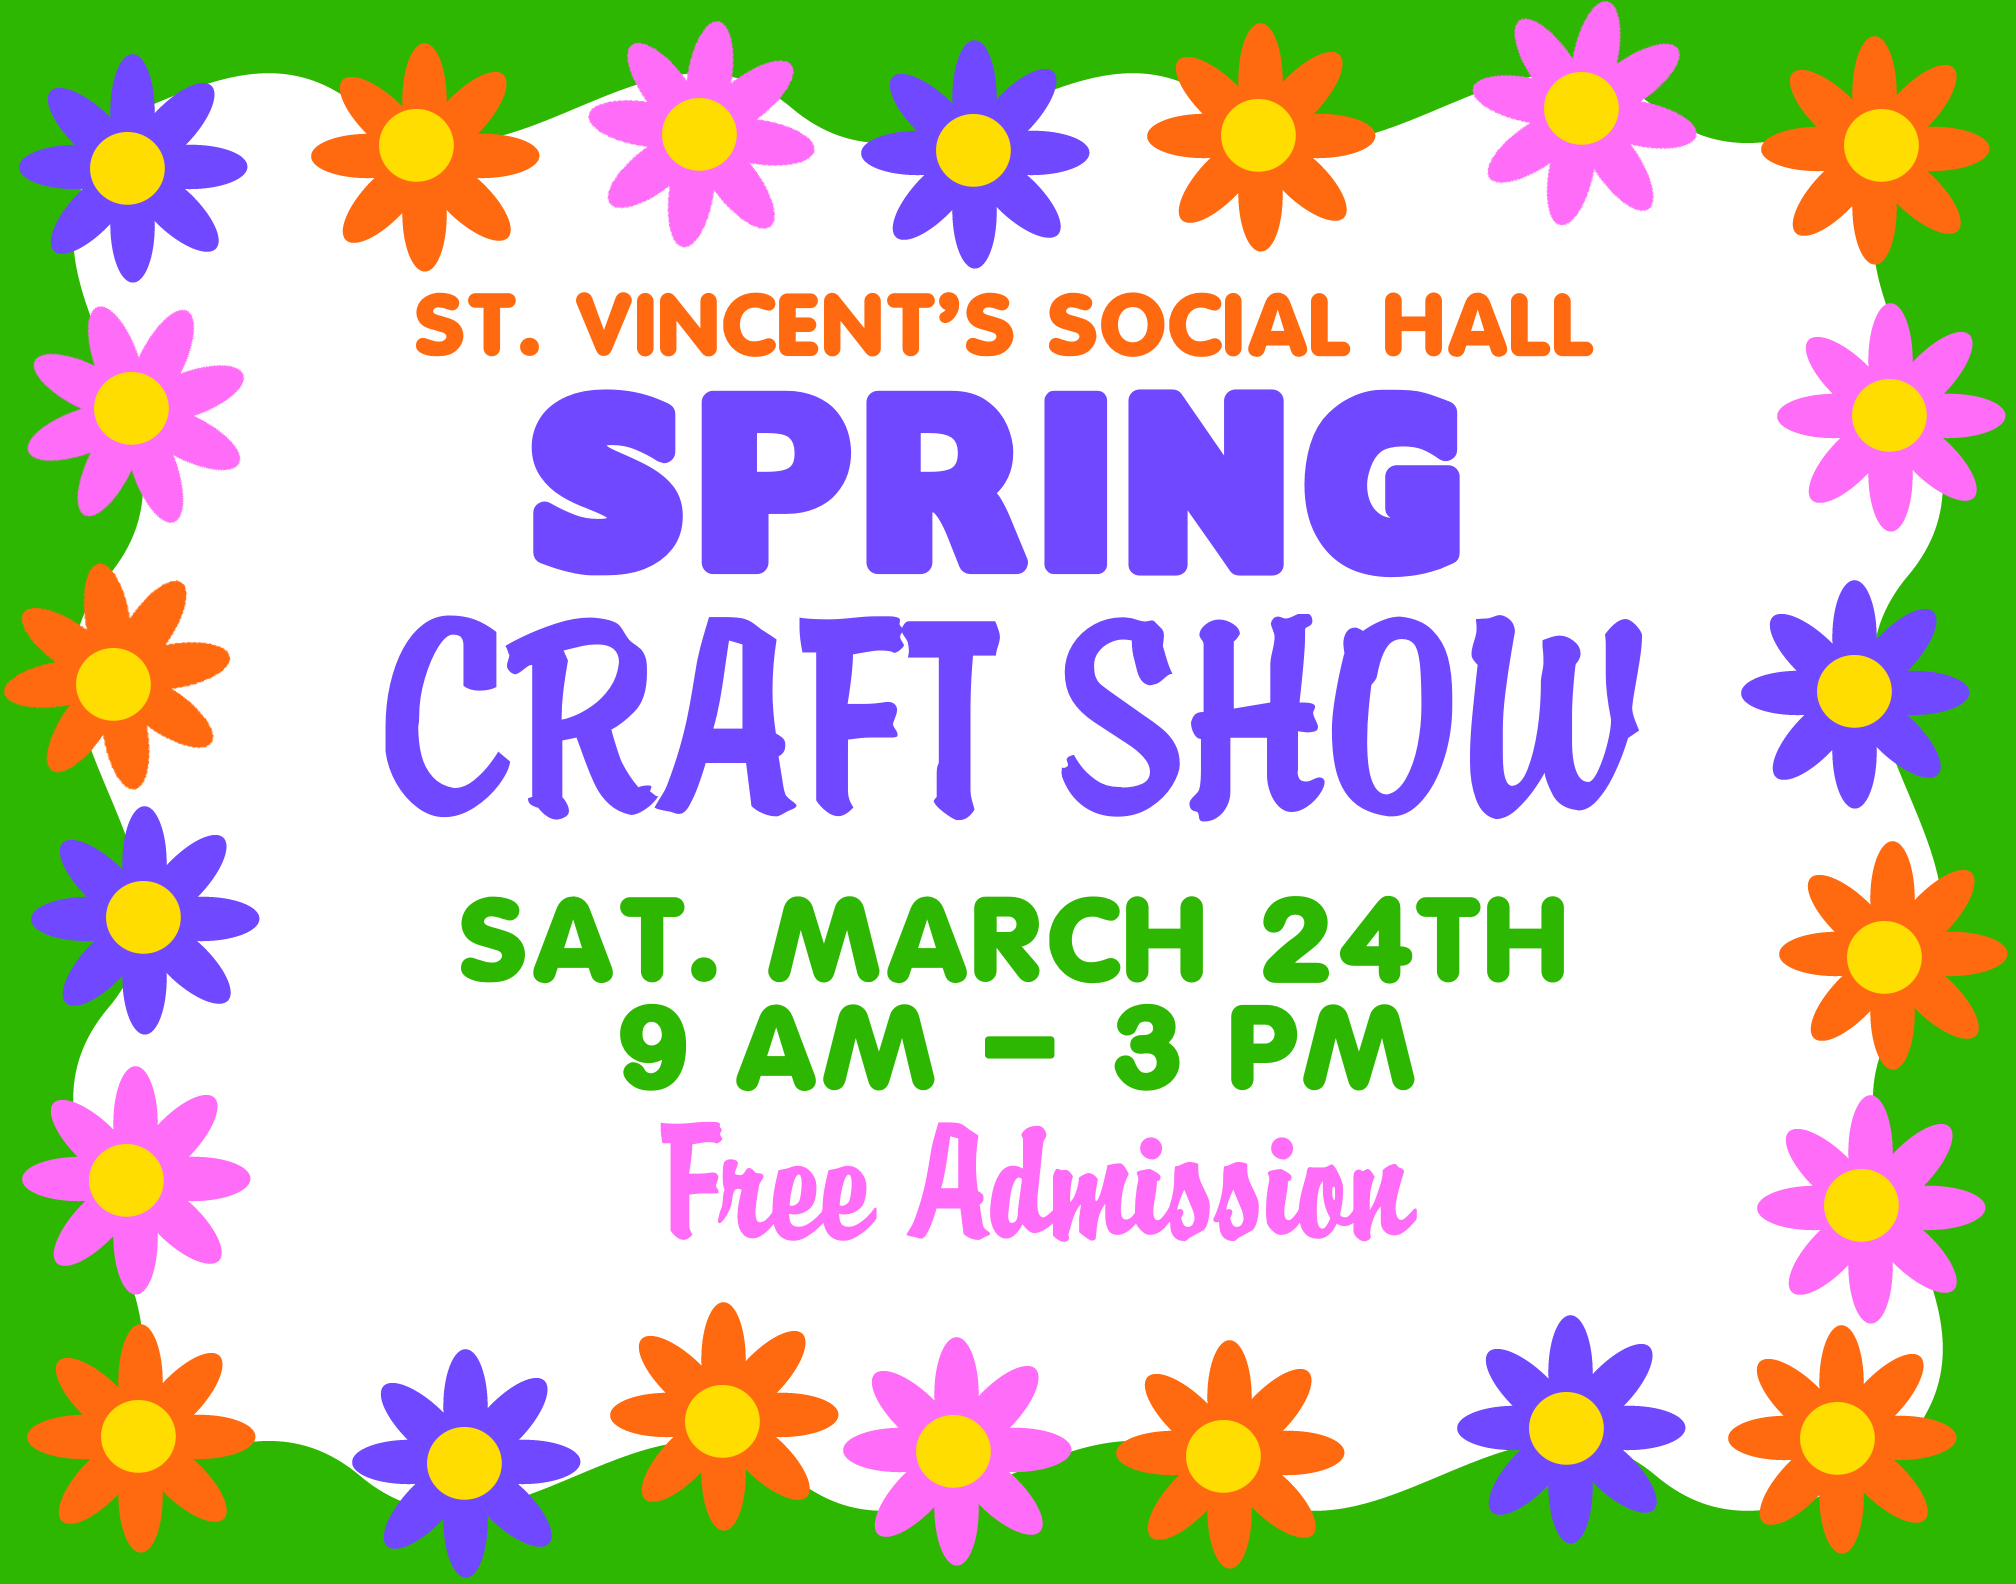 Make A Craft Show Poster   Sring Event Poster Ideas